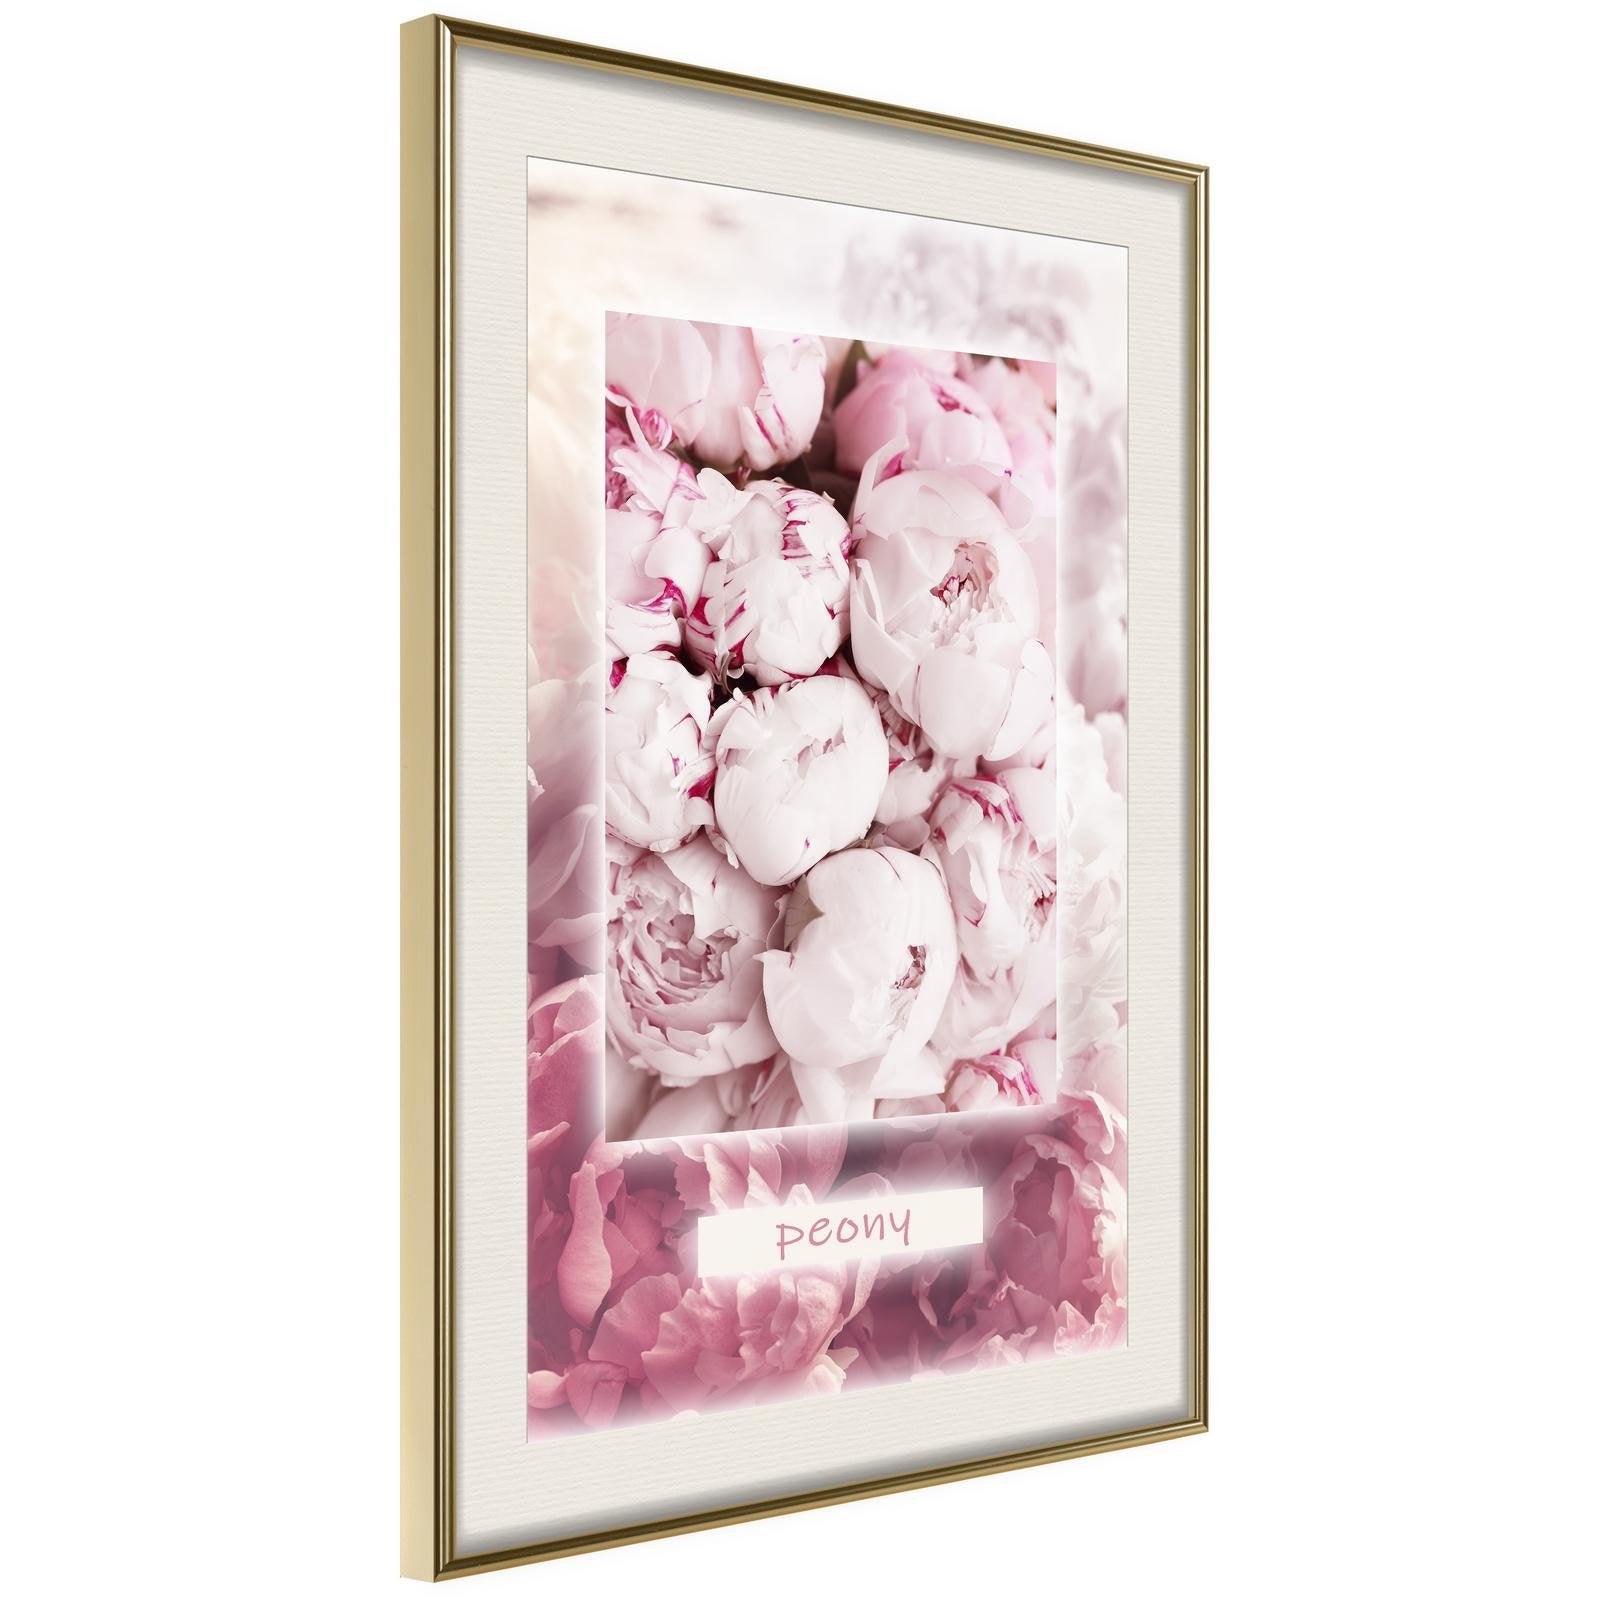 Inramad Poster / Tavla - Scent of Peonies-Poster Inramad-Artgeist-20x30-Guldram med passepartout-peaceofhome.se